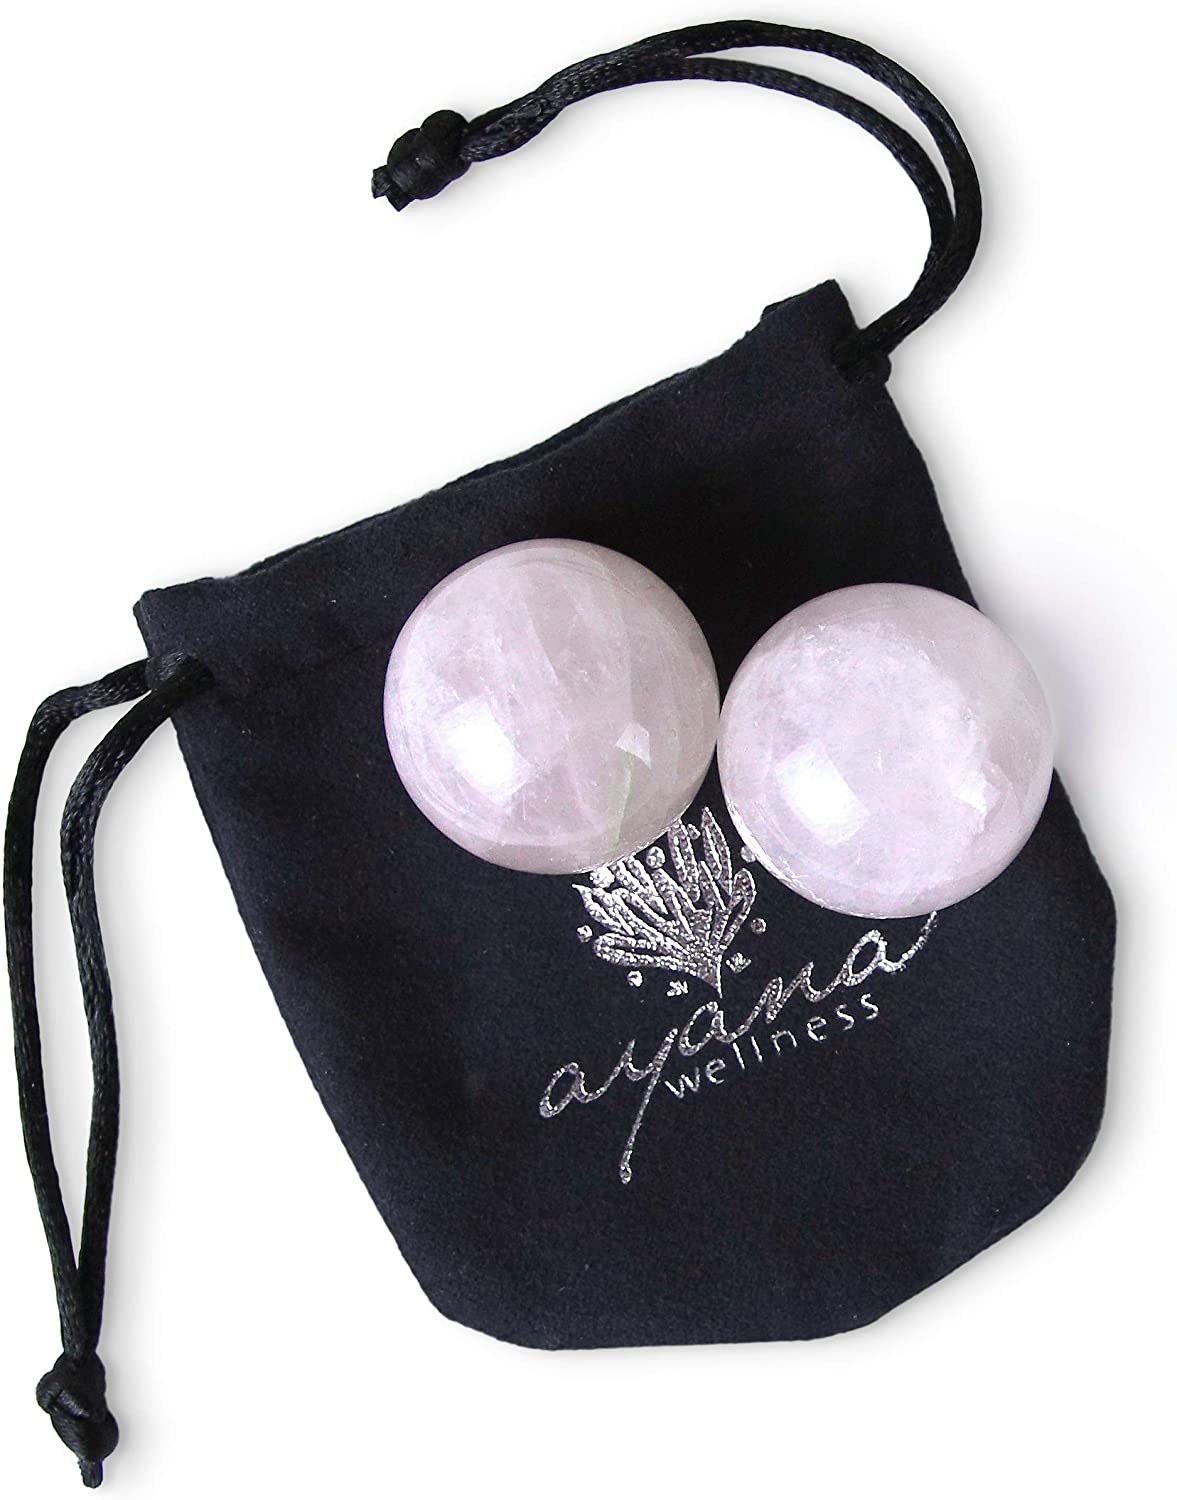 small black satchel holding two round crystal balls